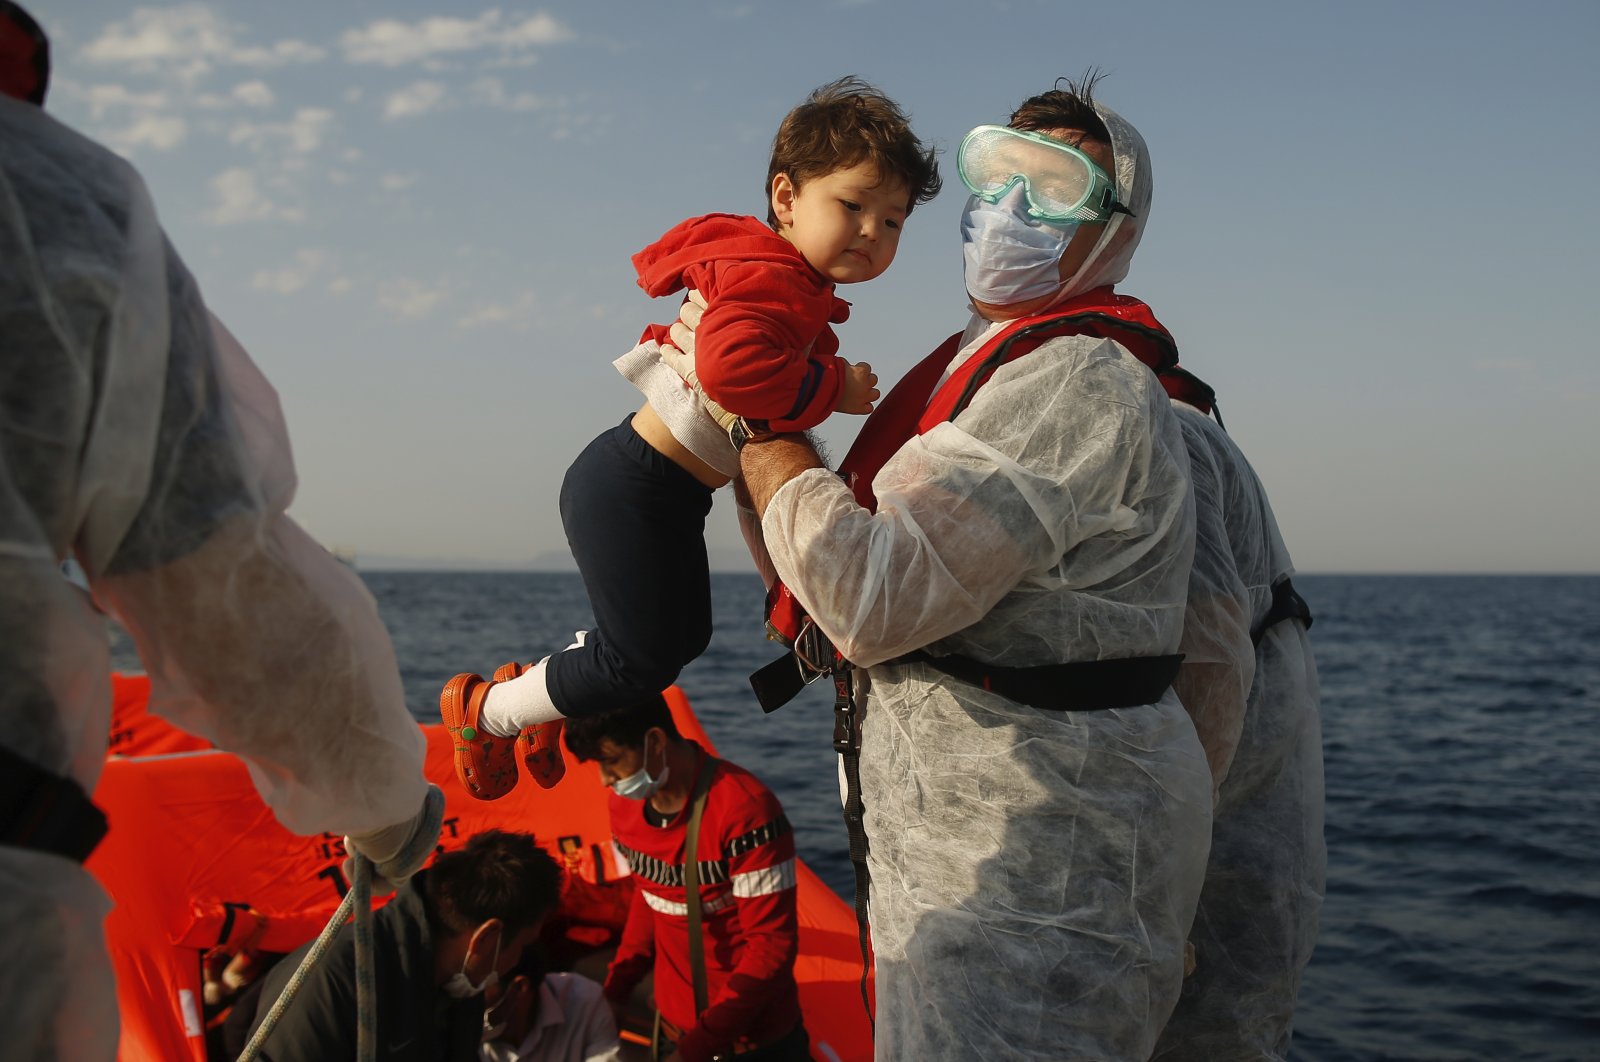 A Turkish coast guard officer, wearing protective gear to help prevent the spread of the coronavirus, lifts a child off a life raft during a rescue operation in the Aegean Sea, between Turkey and Greece, Sept. 12, 2020. (AP File Photo)